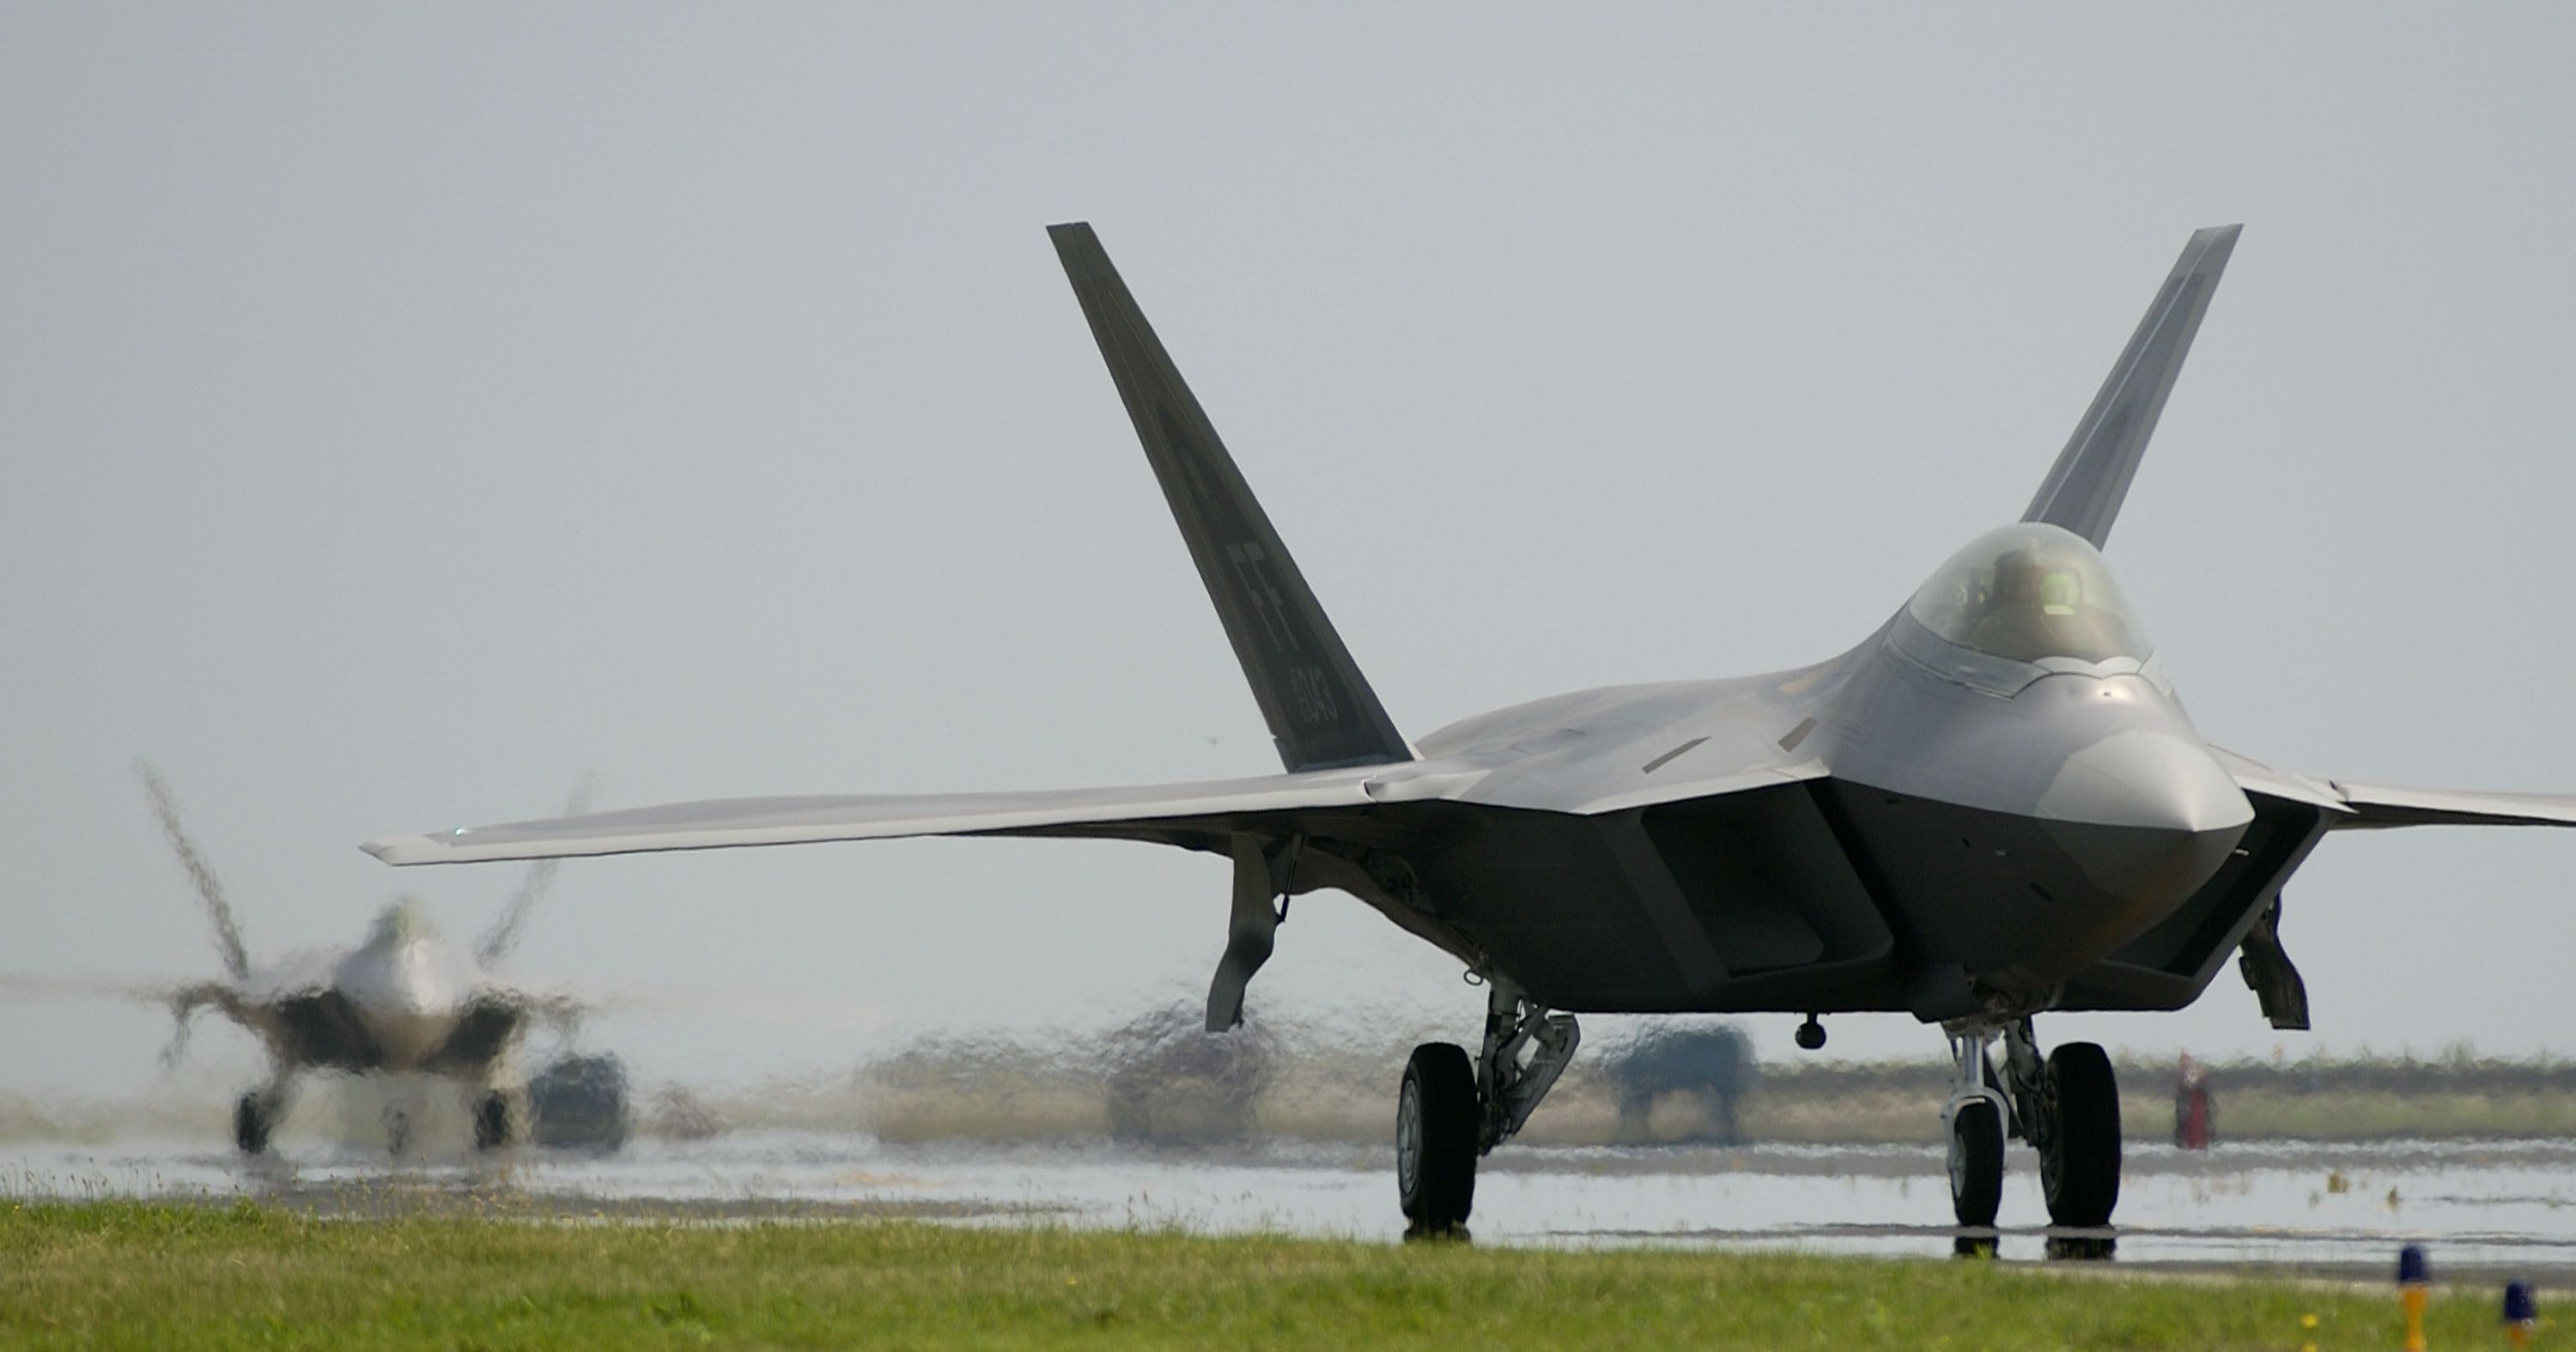 About The F-22 Raptor Fighter Jet